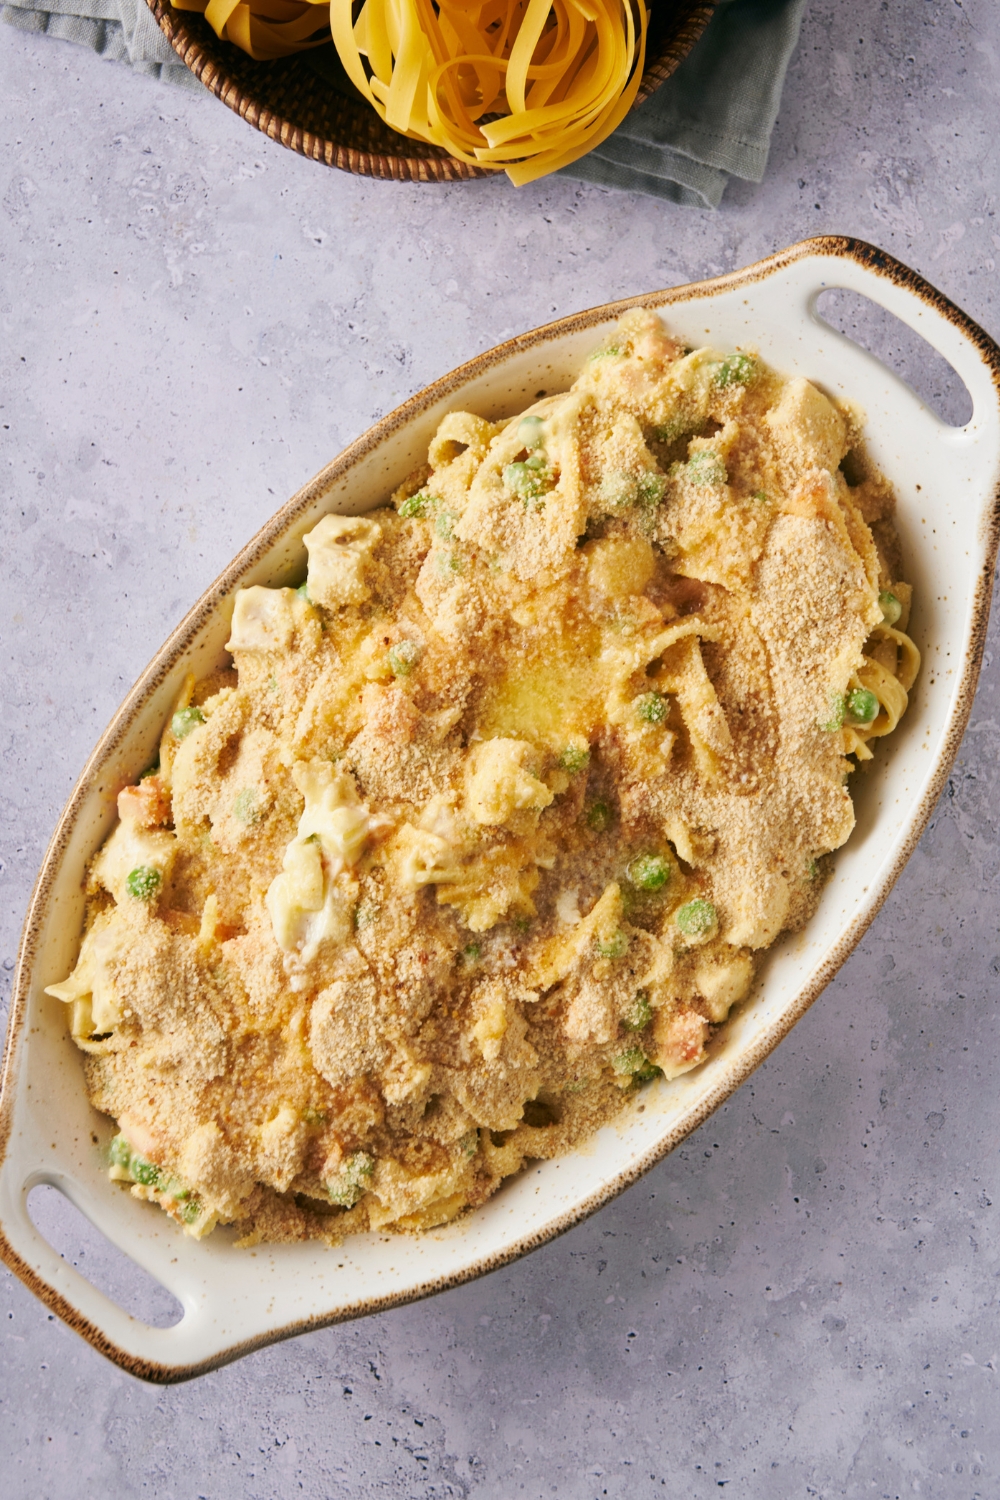 A casserole dish with unbaked chicken noodle casserole in it.